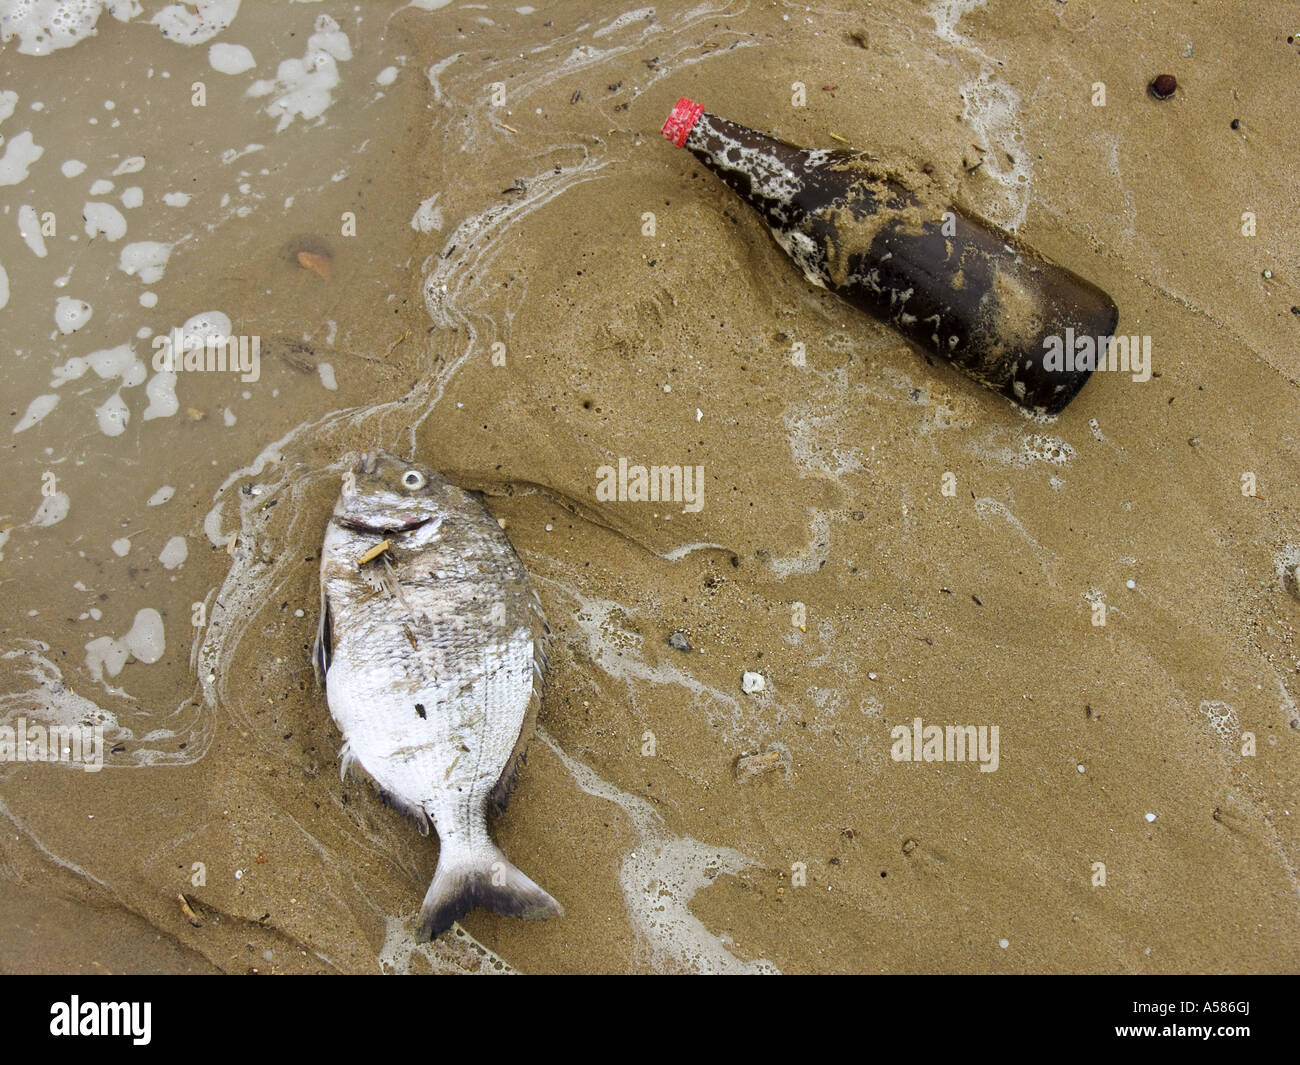 Dead stranded fish and a bottle on the beach Stock Photo